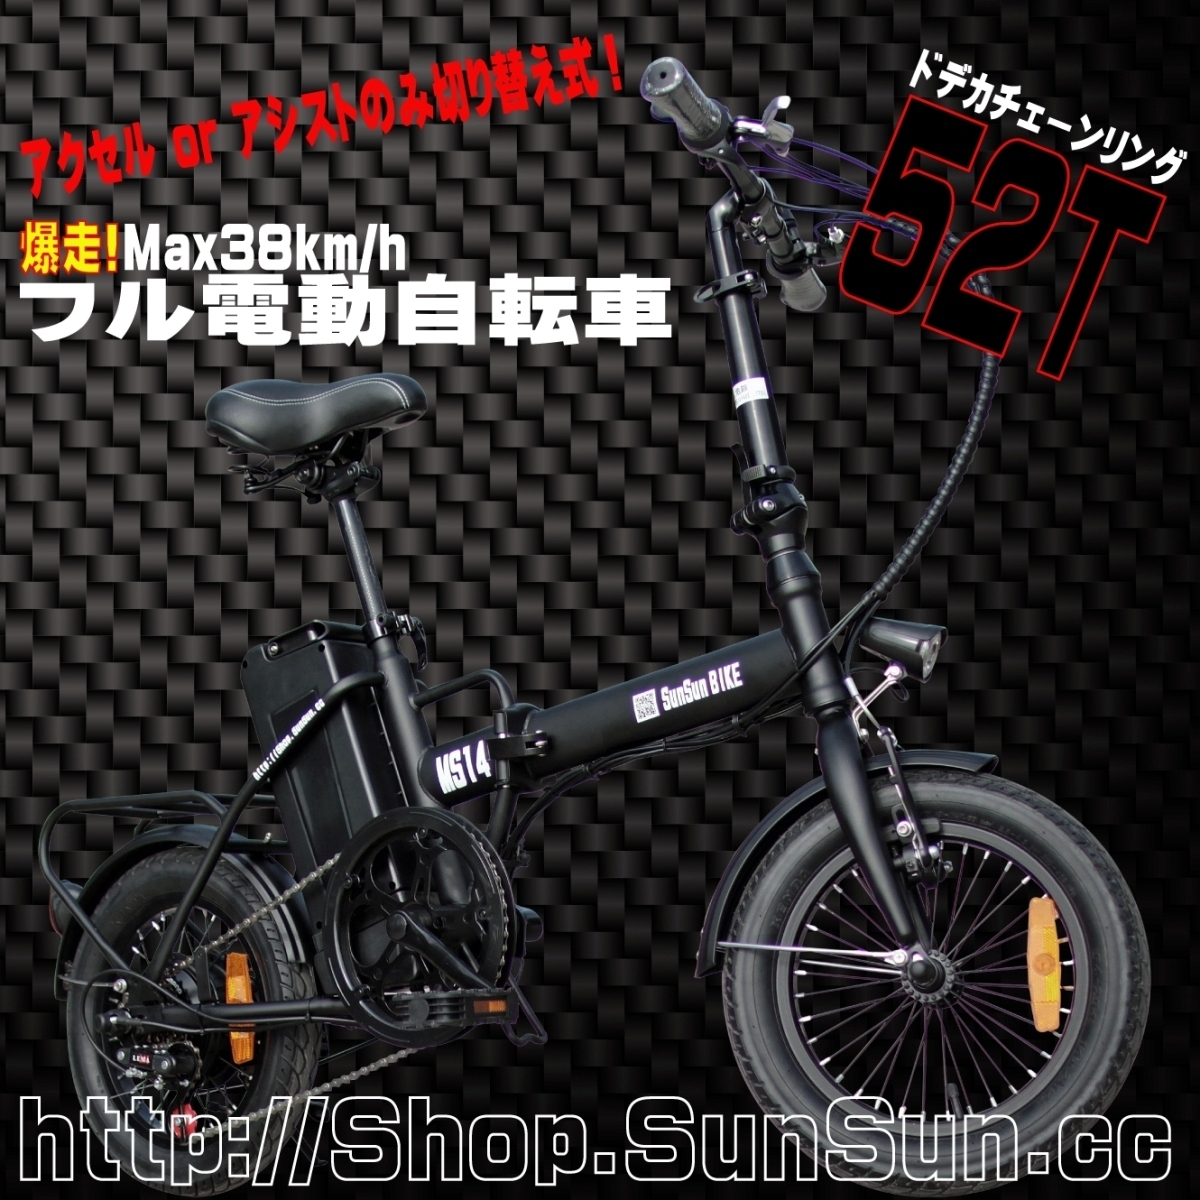  electromotive bicycle Max35km/h powerful 500W specification folding full electric assist switch type bicycle 